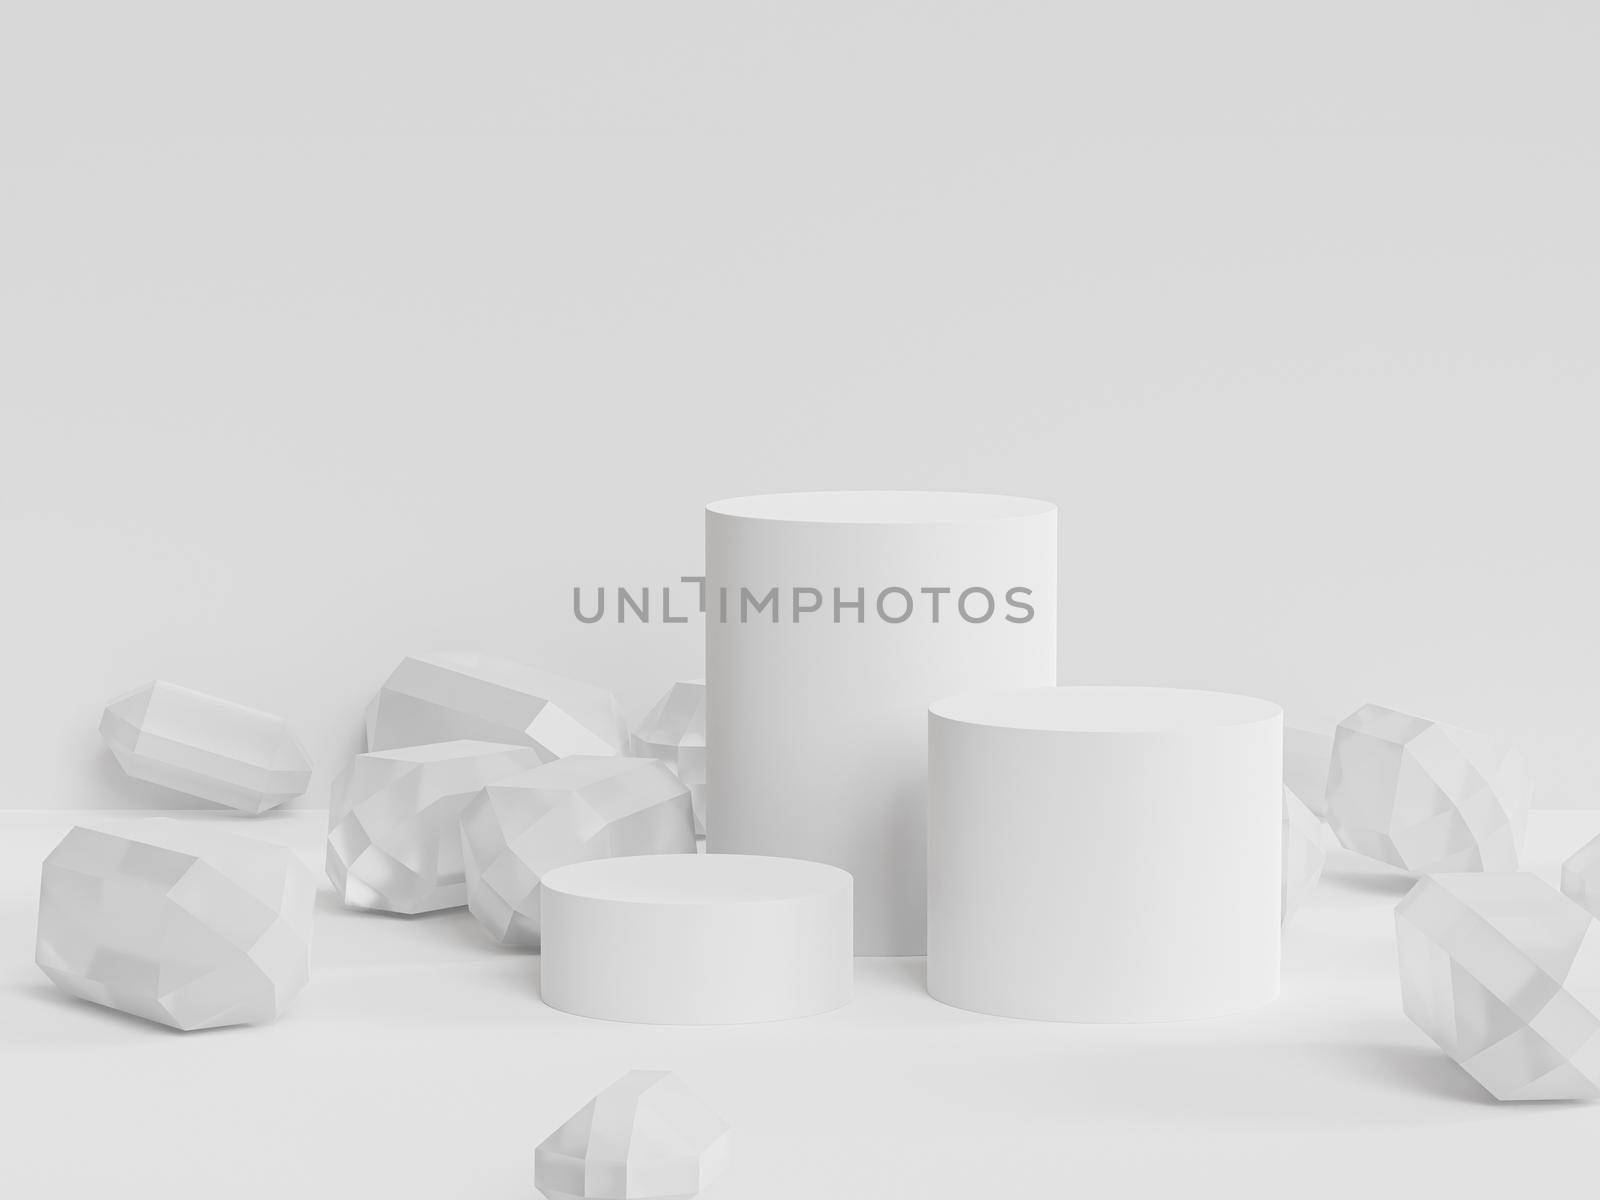 Podiums or pedestals for products or advertising with crystals on white background, minimal 3d render by Frostroomhead